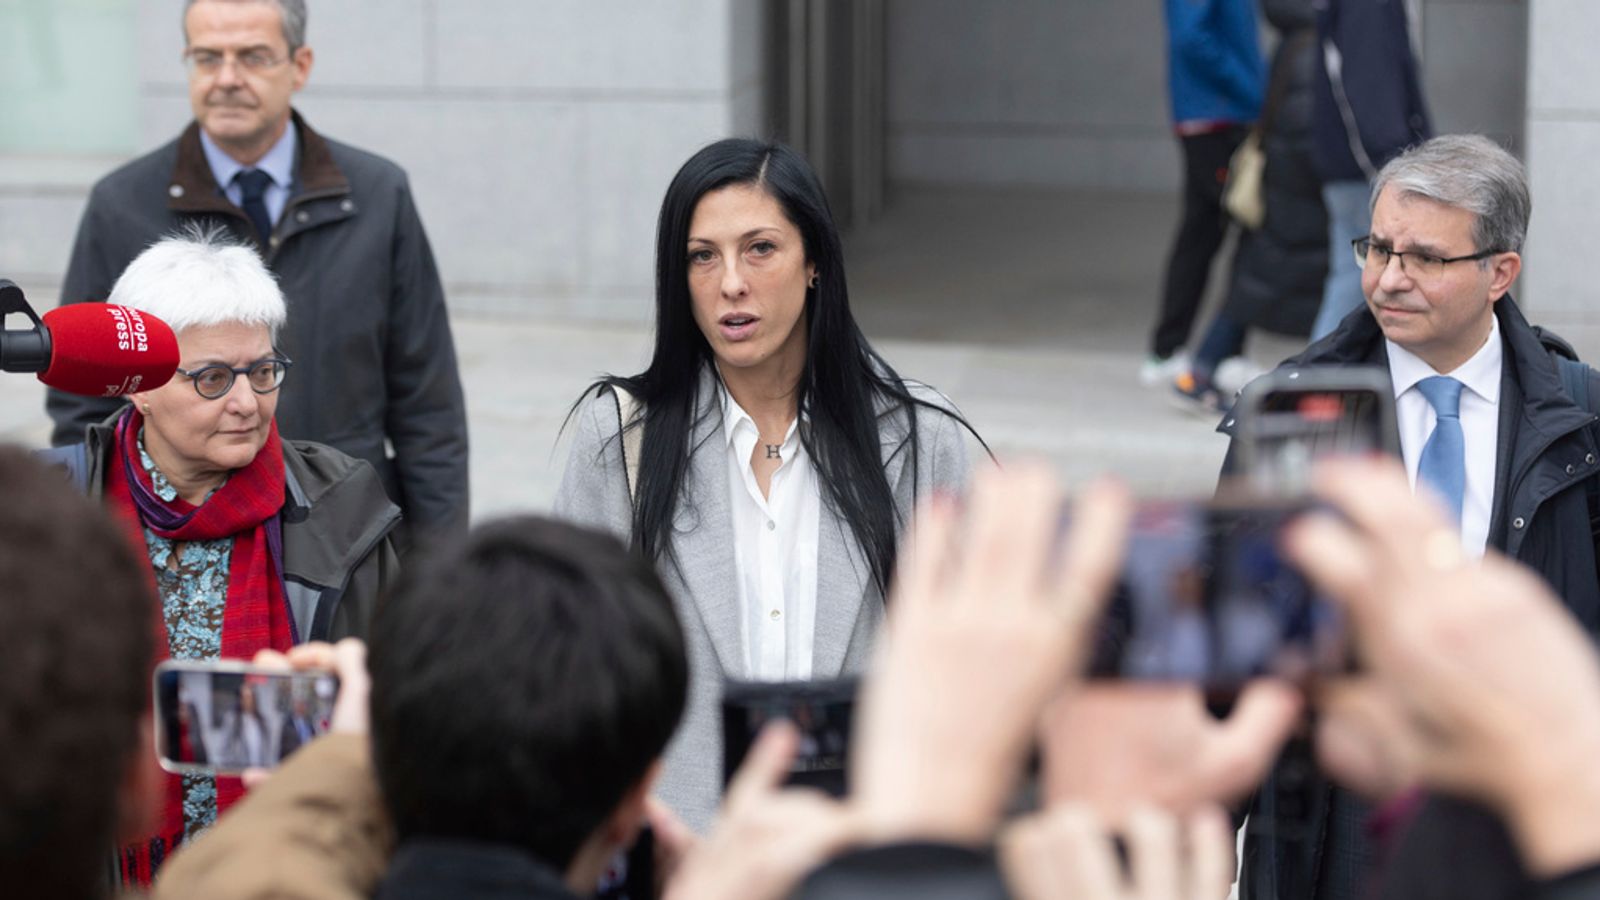 Jenni Hermoso testifies in Madrid court that Rubiales kiss was not consensual